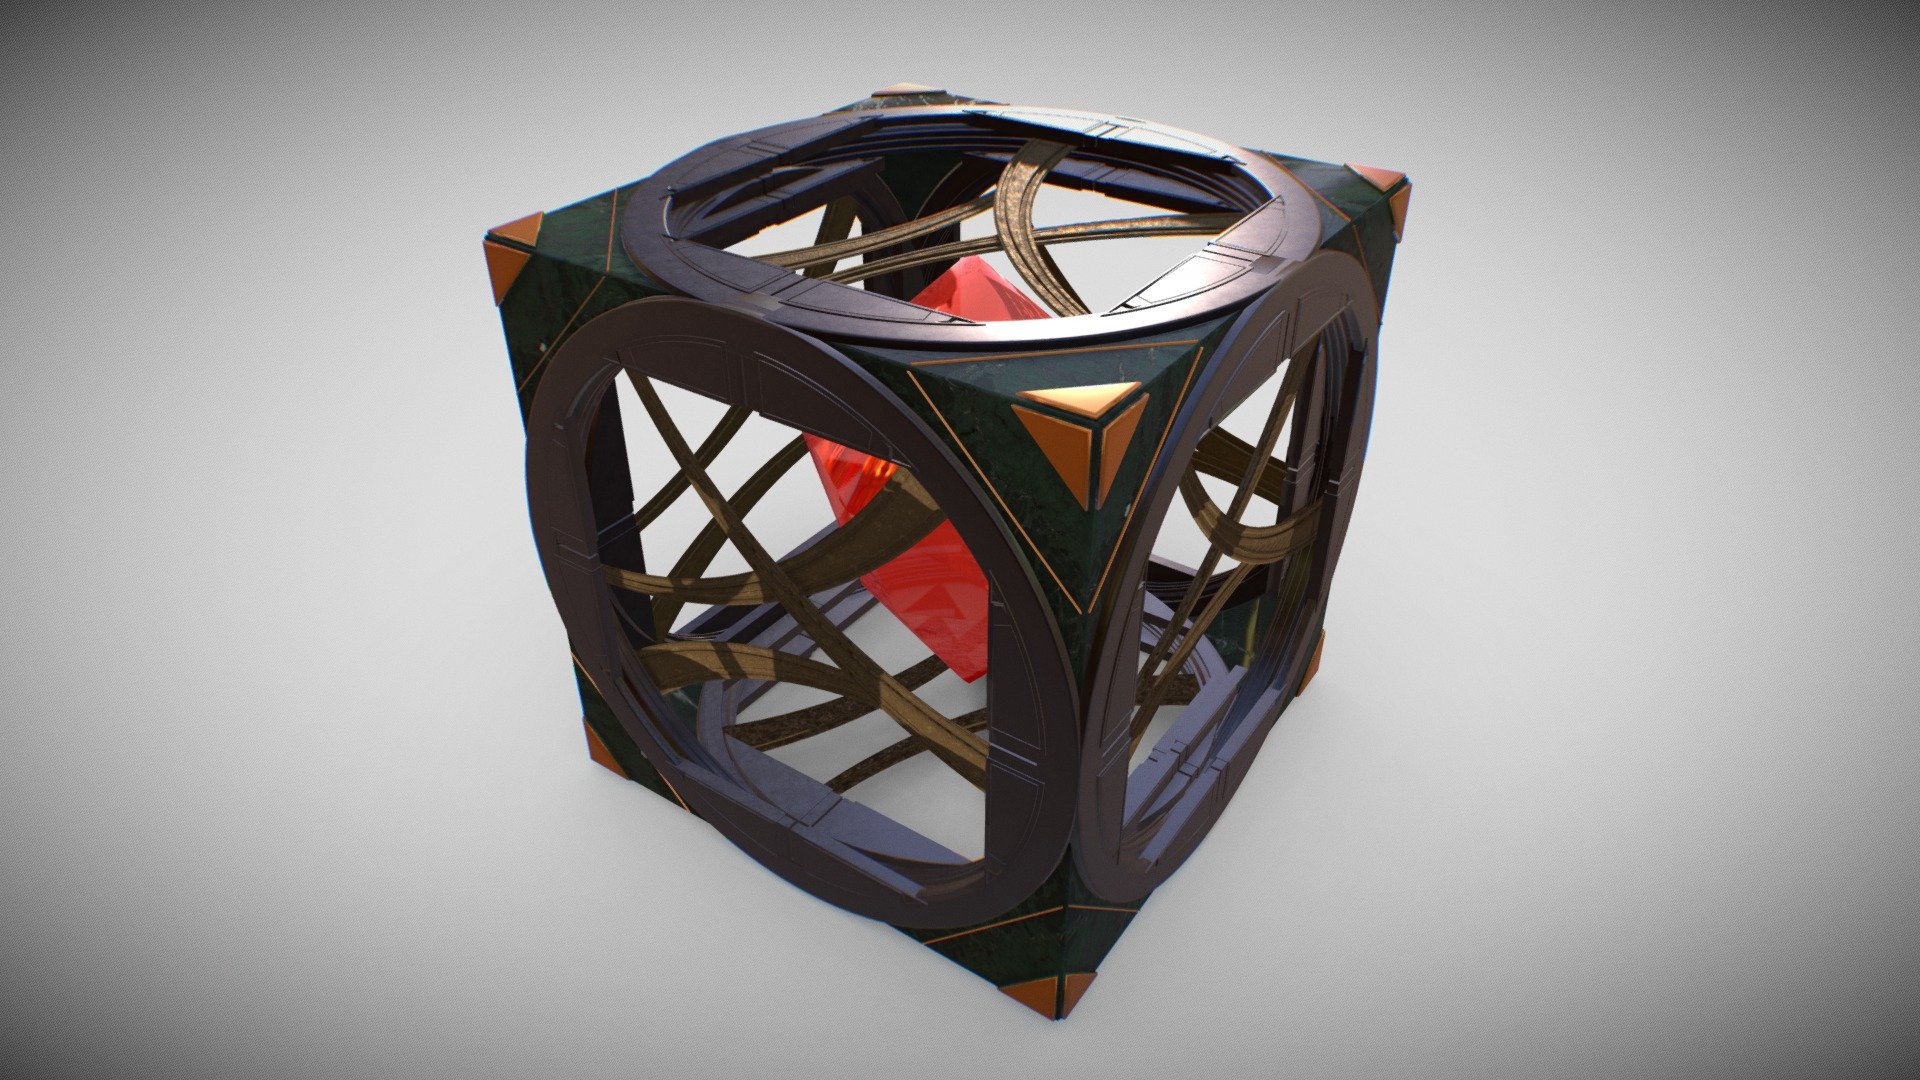 Doctor Strange's mysterious cube used in the movie Spider-Man: No way home. The magic box was featured in many scenes in the film, including Strange's pursuit of the Peter Parker along the mirror dimension.
We include STL format for 3D printers, fbx, obj, and 3dsmax - Spider-Man No way home Dr Strange Mysterious box - Buy Royalty Free 3D model by bendjama1986 3d model